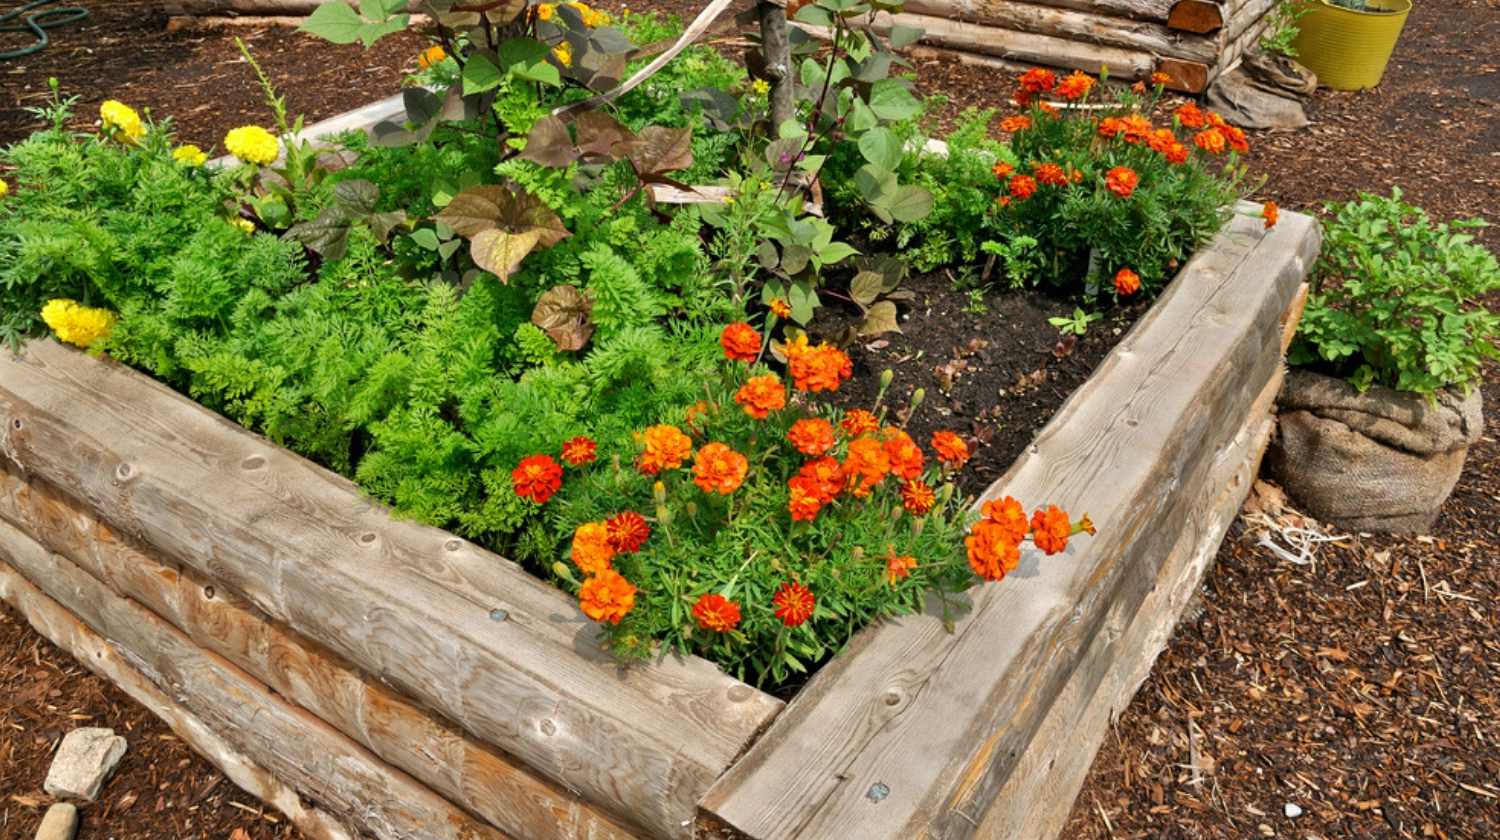 How To Build A Raised Flower Bed Garden, Raised Flower Bed Frame